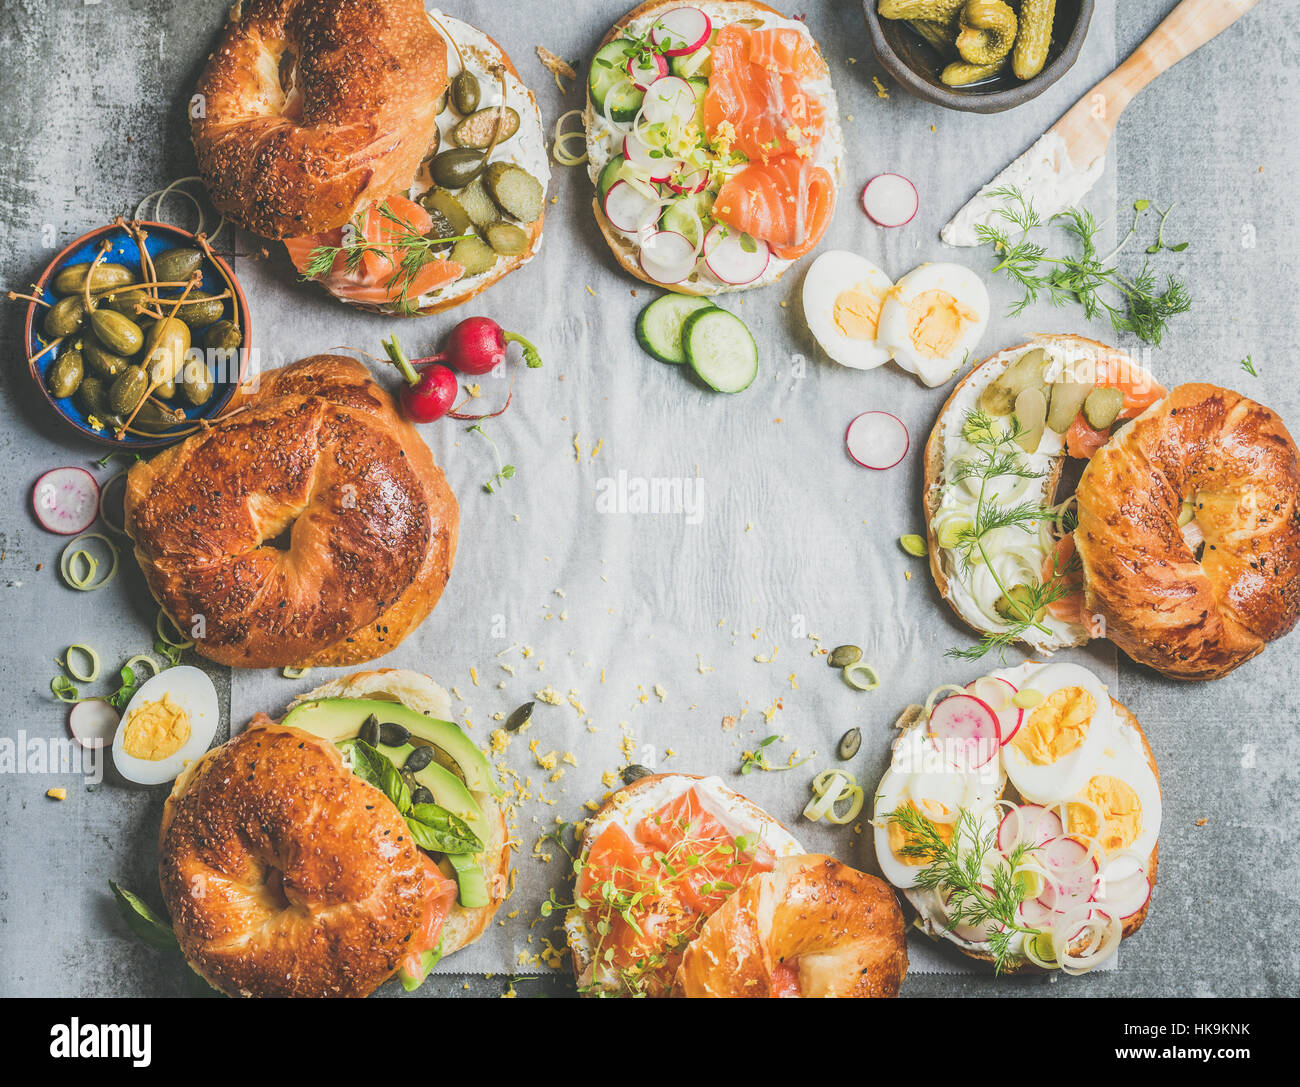 Variety of bagels with salmon, eggs, radish, avocado, cucumber, greens and cream cheese for breakfast, healthy lunch or party over grey concrete backg Stock Photo